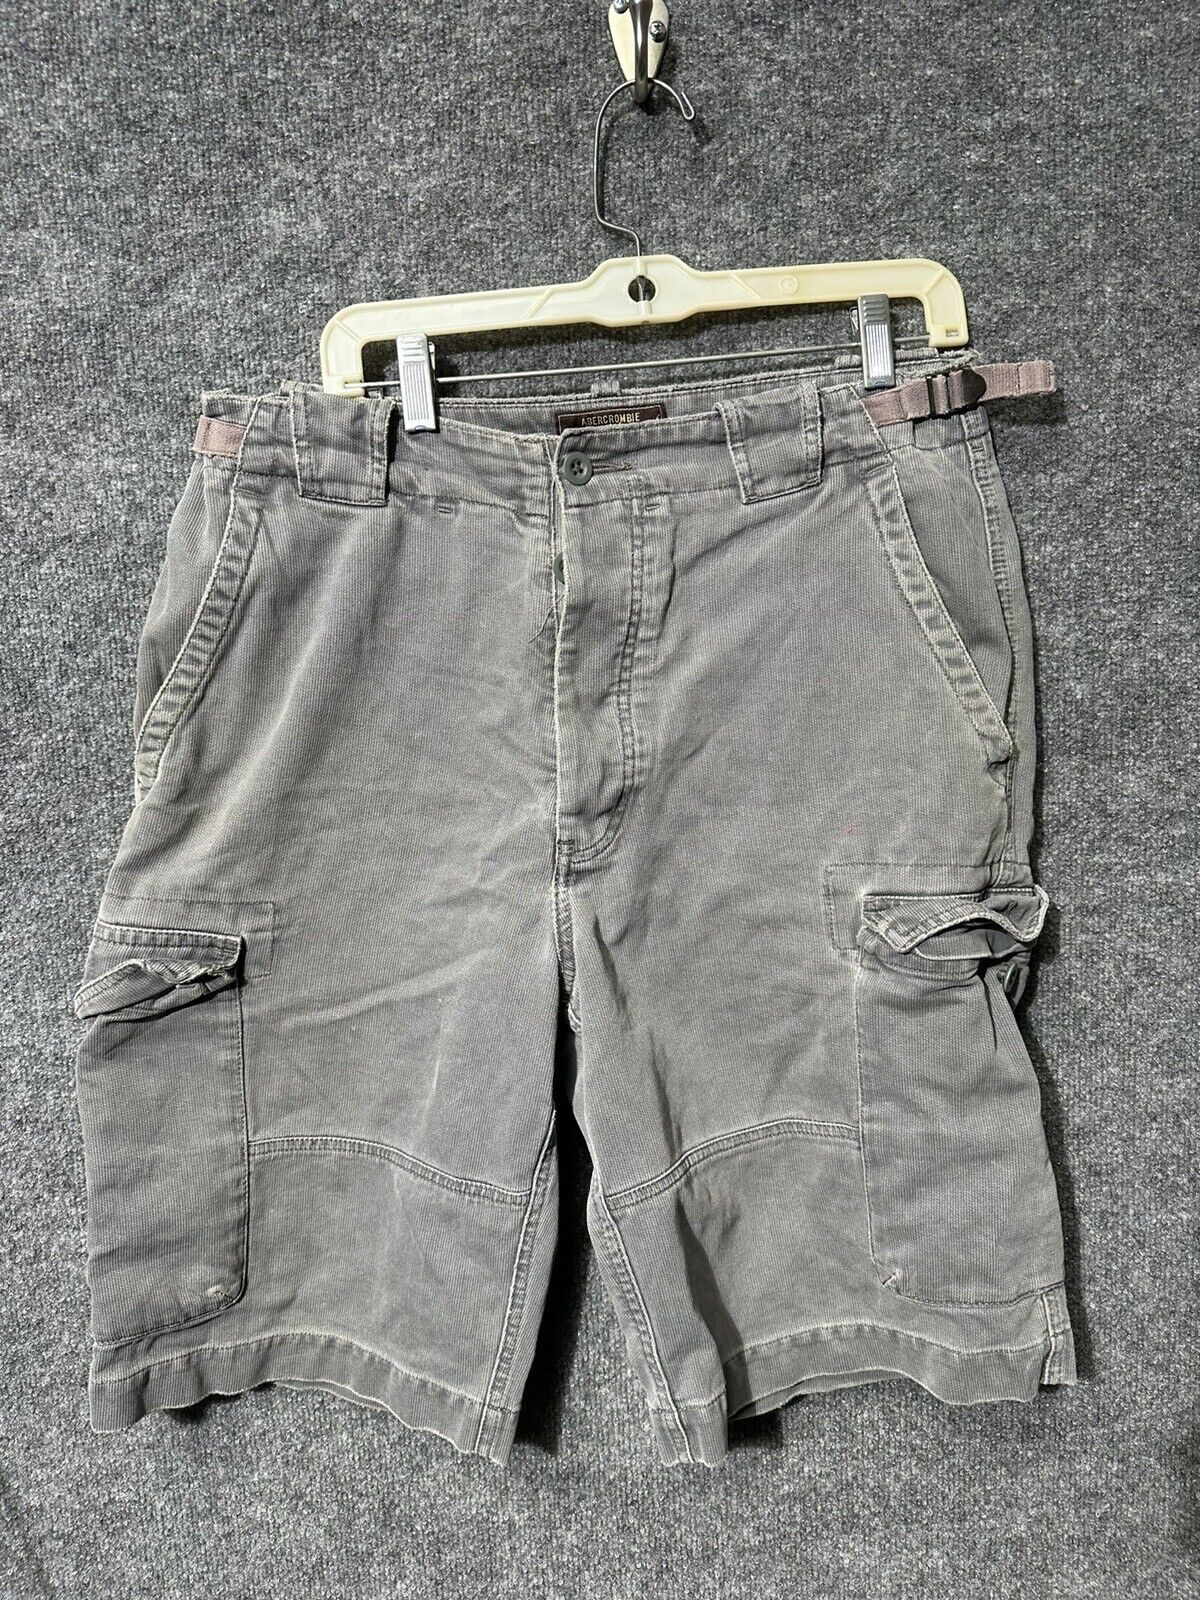 Abercrombie & Fitch Cargo Shorts Mens 31 Gray Hea… - image 1